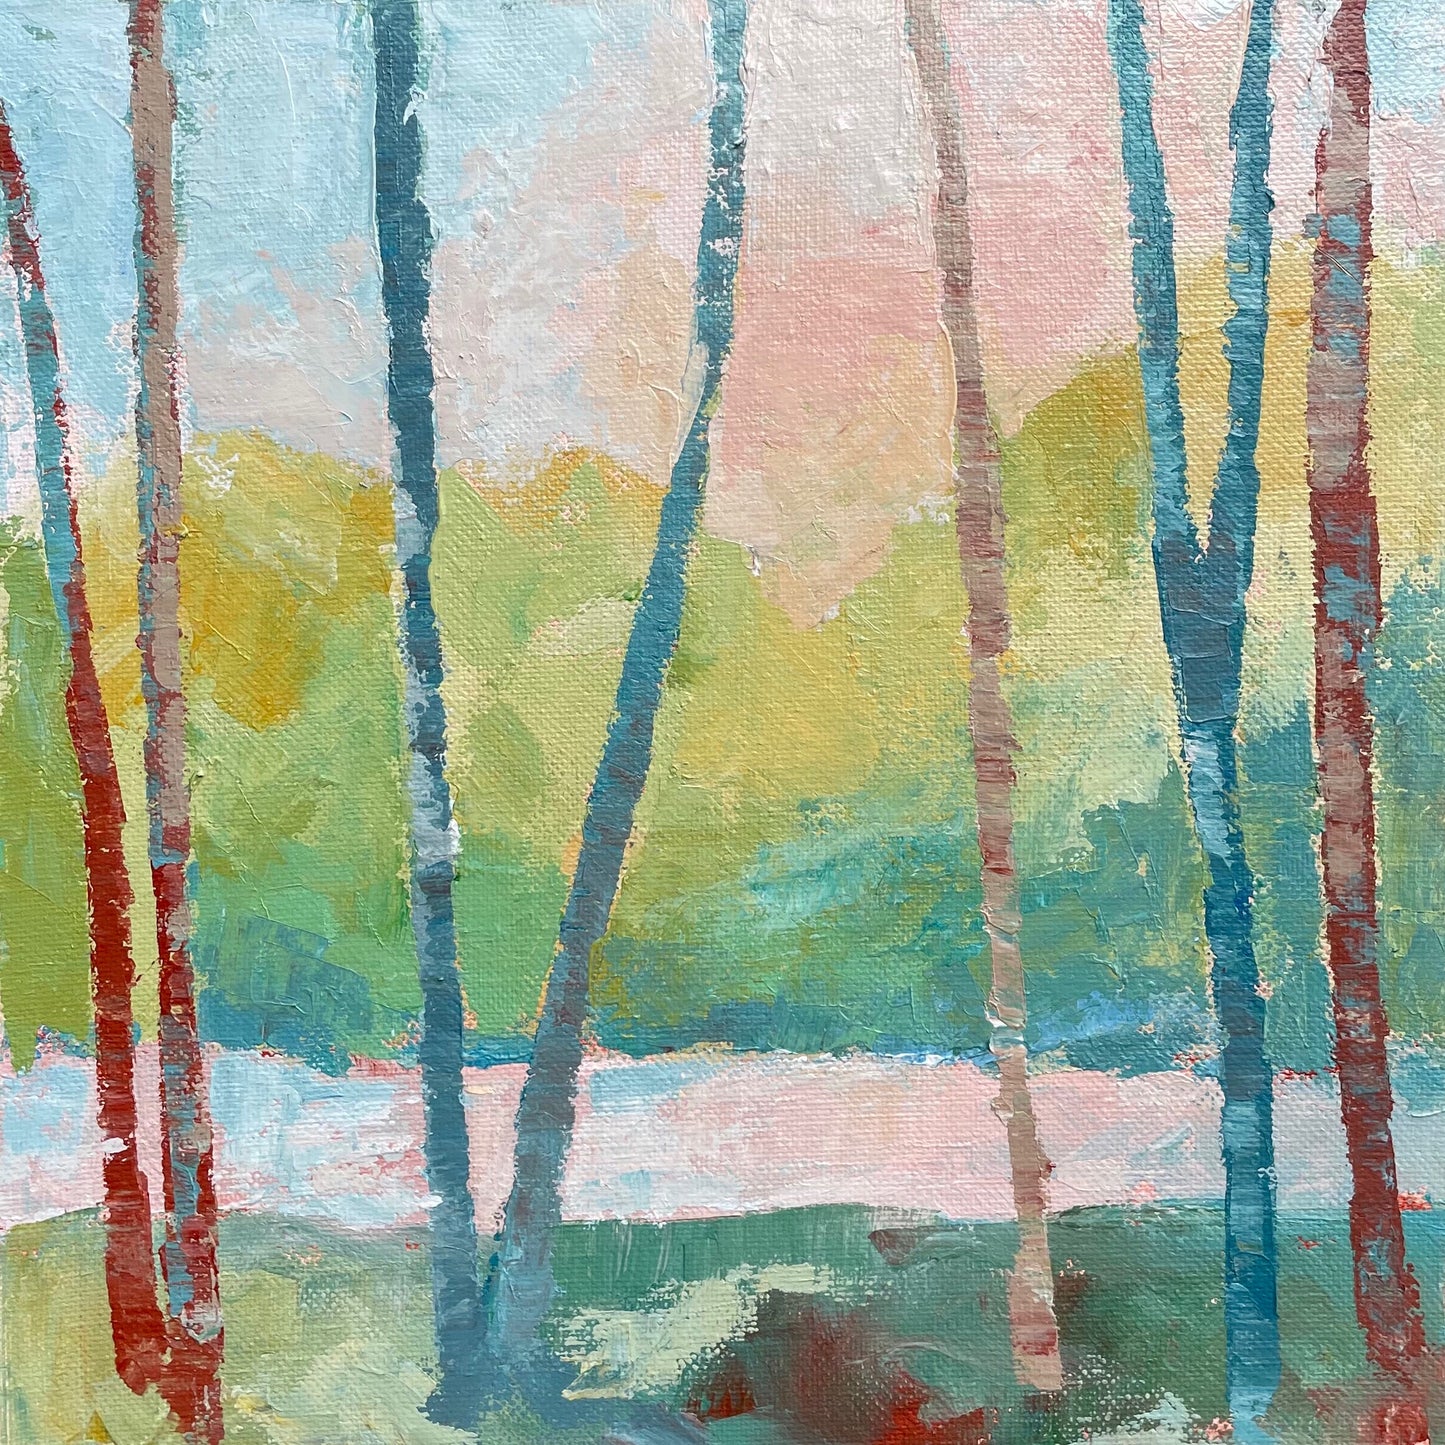 "Pretty Trees Please" A Palette Knife Painting Class